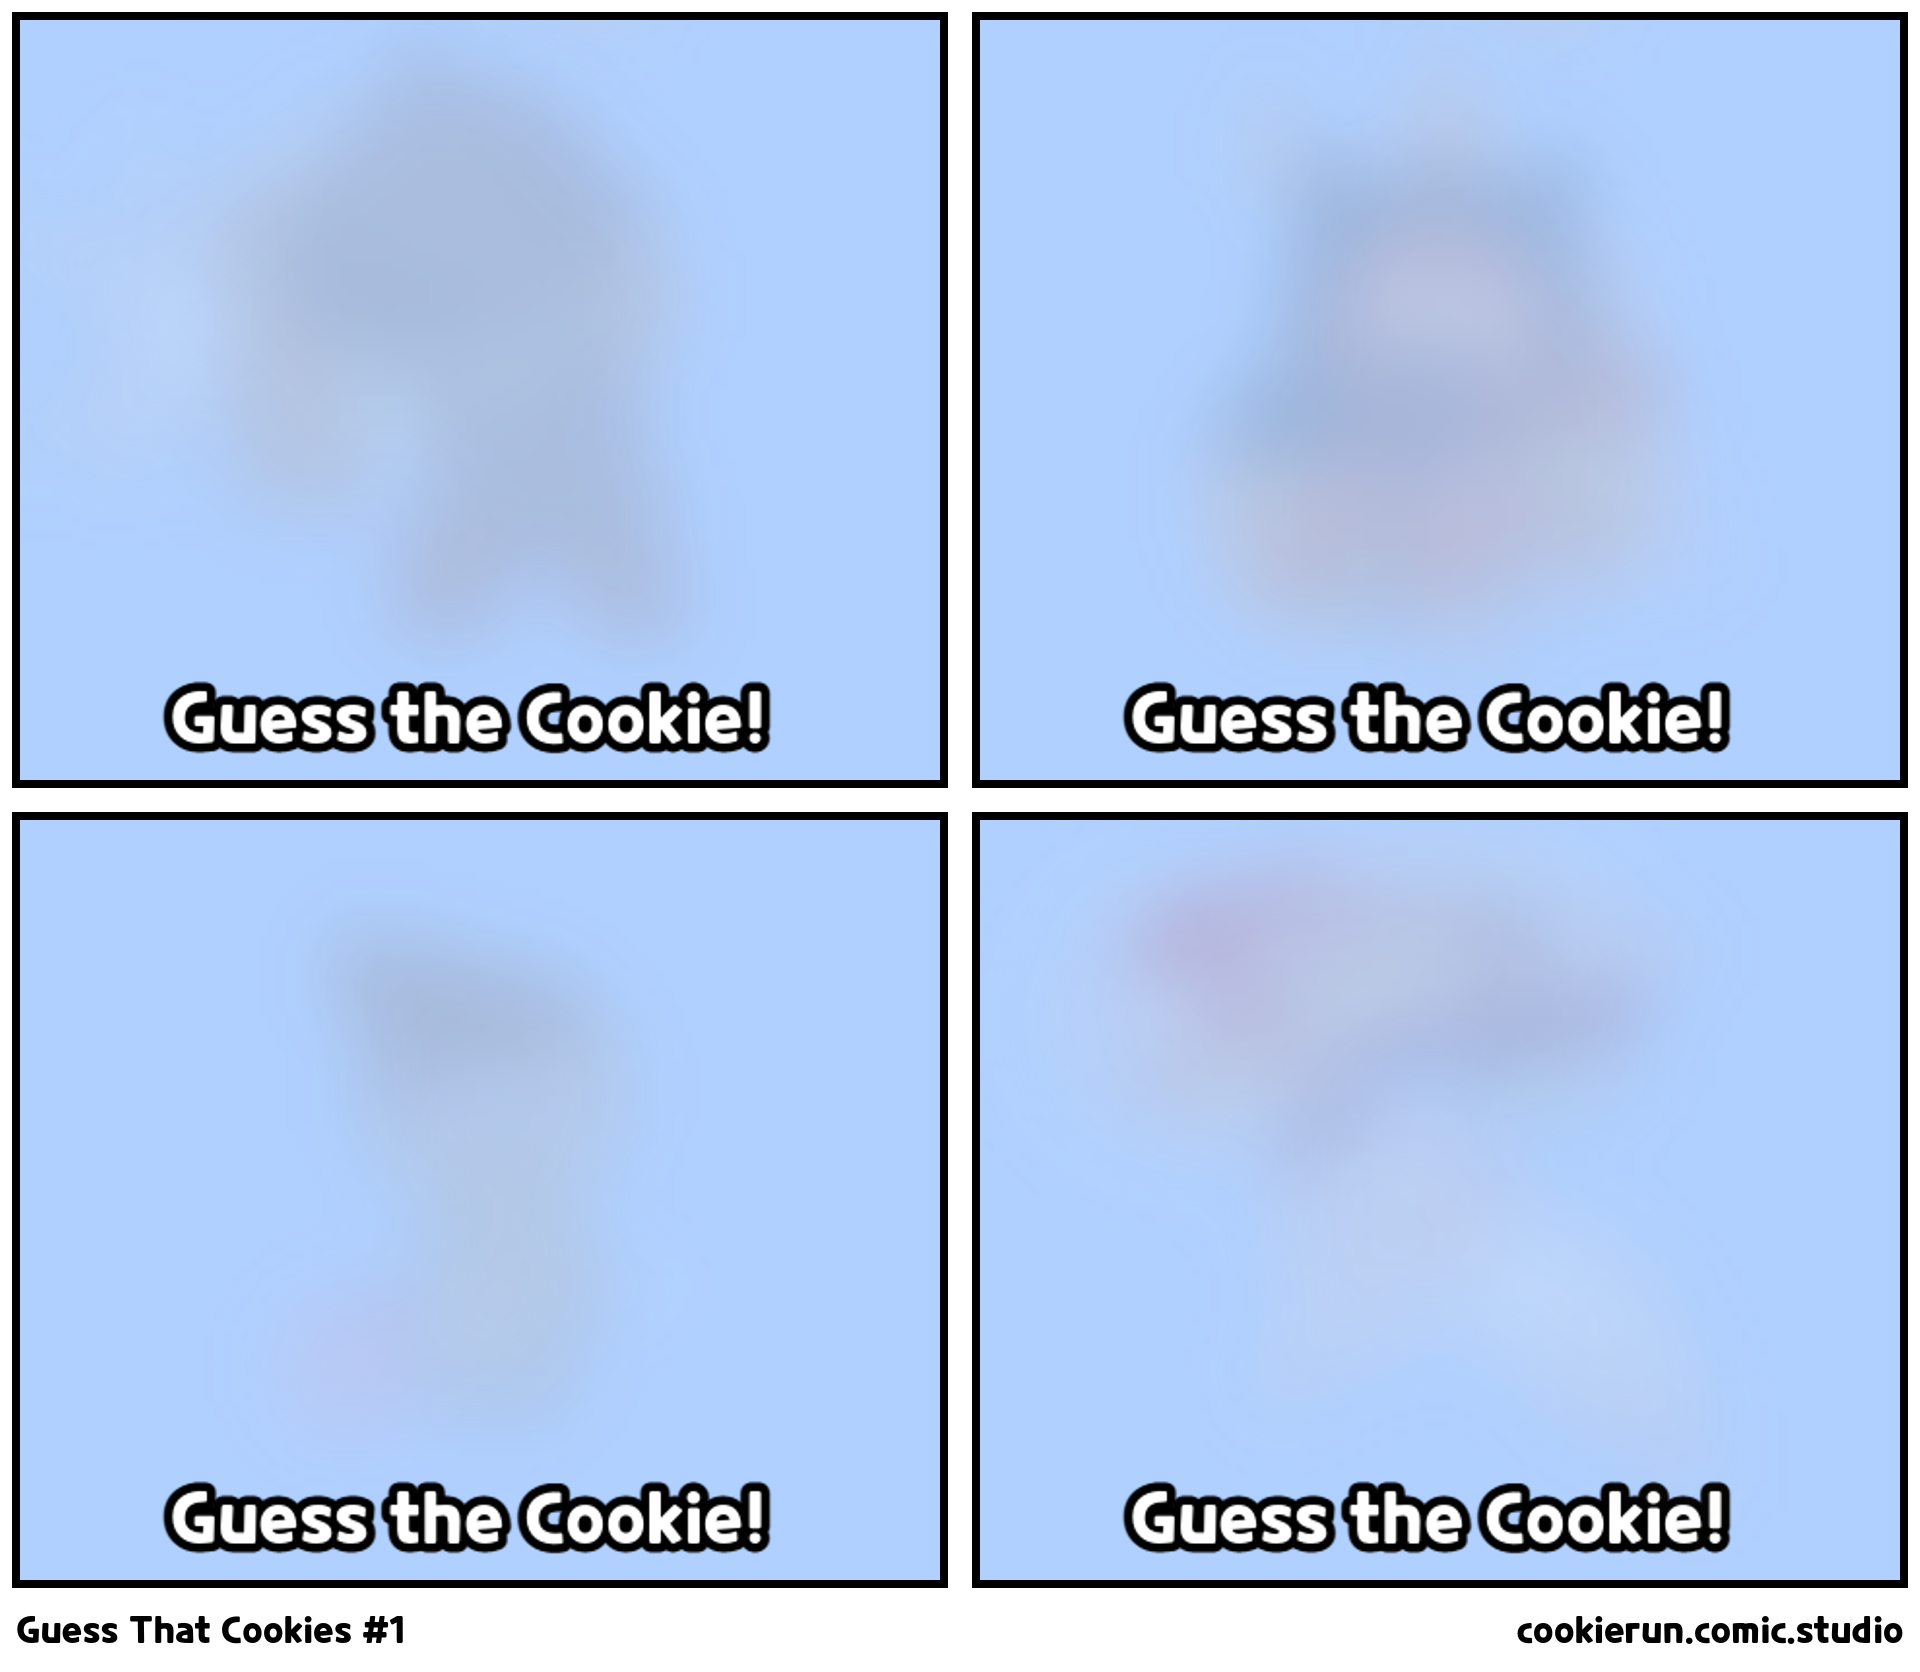 Guess That Cookies #1